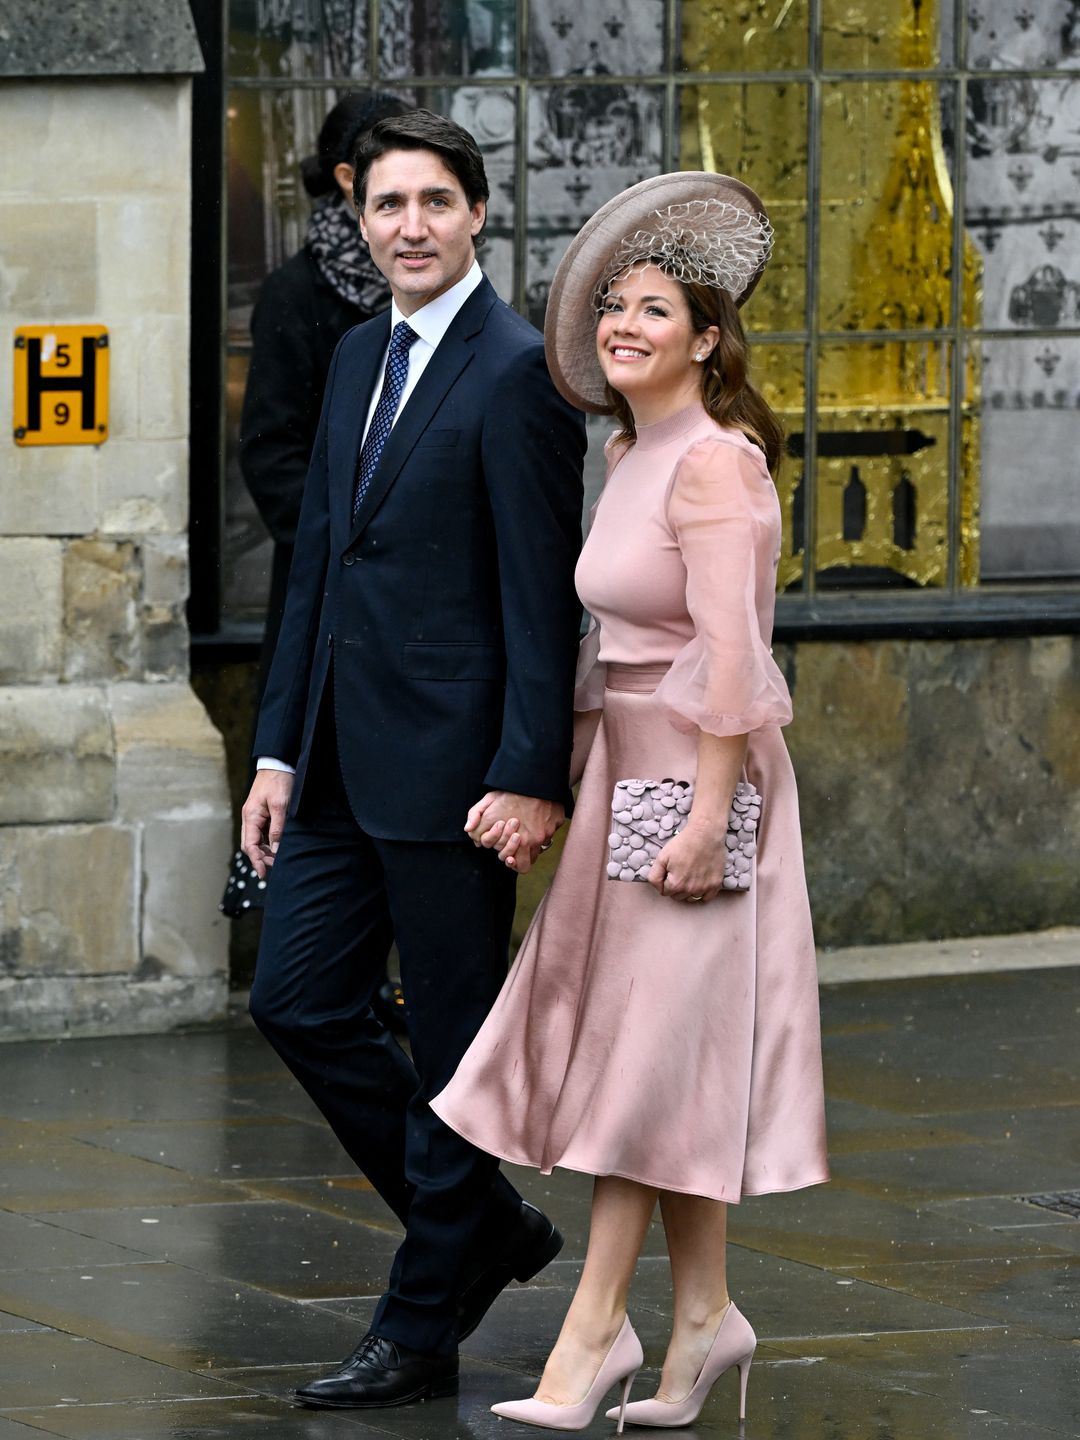 Canadian prime minister Justin Trudeau and wife Sophie Trudeau